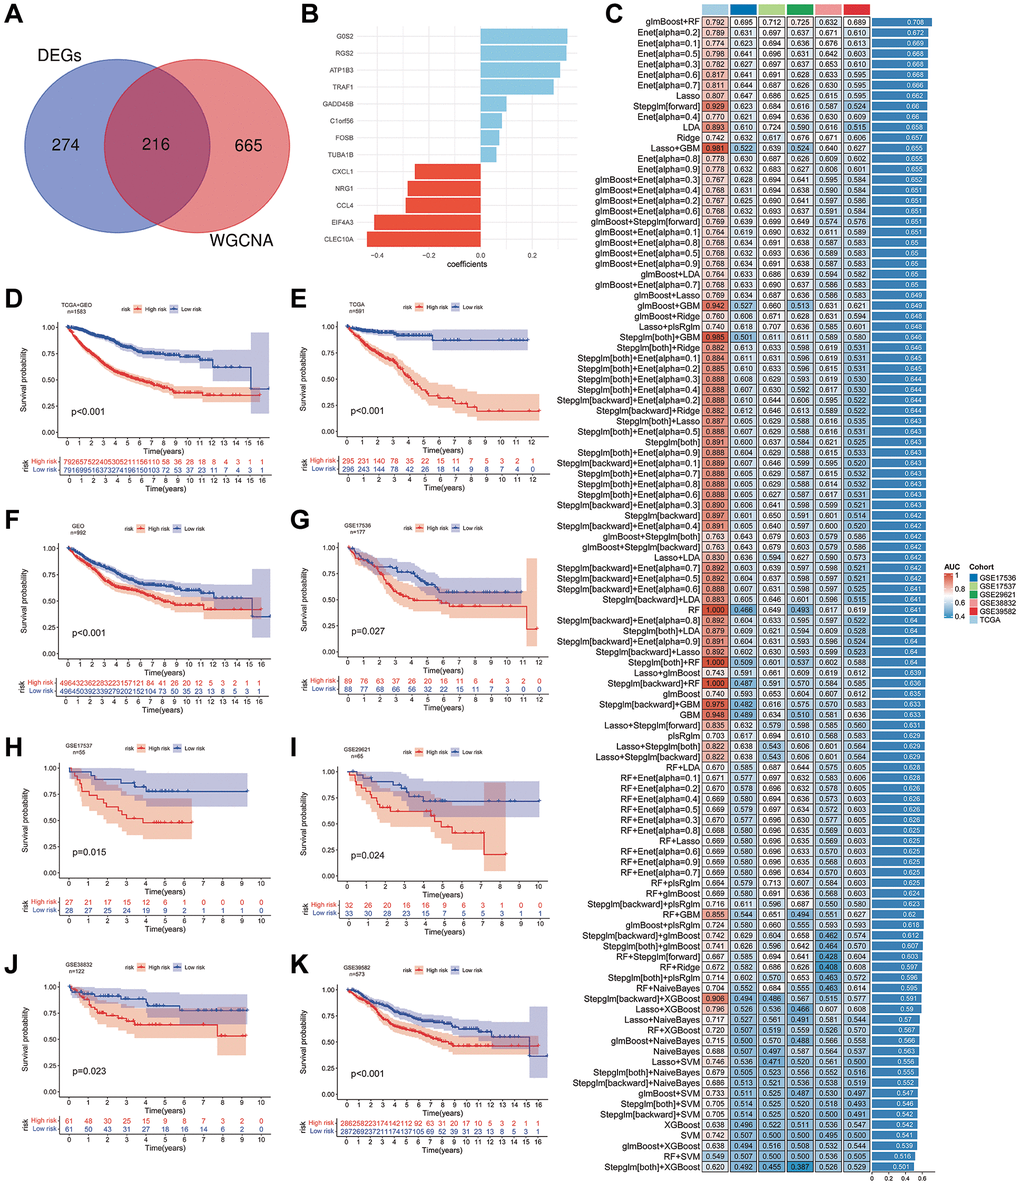 Development of prognostic risk models using machine learning algorithms. (A) Identification of the intersection between differentially expressed genes and genes from the turquoise module within subtypes of SMCs in primary and liver metastasis colorectal cancer tissues. (B, C) Construction of prognostic risk models employing 113 machine learning algorithms. The bar chart illustrates the relevant genes and their correlation coefficients (B), while the heatmap displays the AUC values for training and validation cohorts under various algorithms (C). (D–F) Depiction of Kaplan-Meier survival curves for high- and low-risk groups within all samples (D), training cohorts (E), and validation cohorts (F). (G–K) Display of Kaplan-Meier survival curves representing high- and low-risk groups in validation cohorts from GSE17536 (G), GSE17537 (H), GSE29621 (I), GSE38832 (J), and GSE39582 (K) samples.